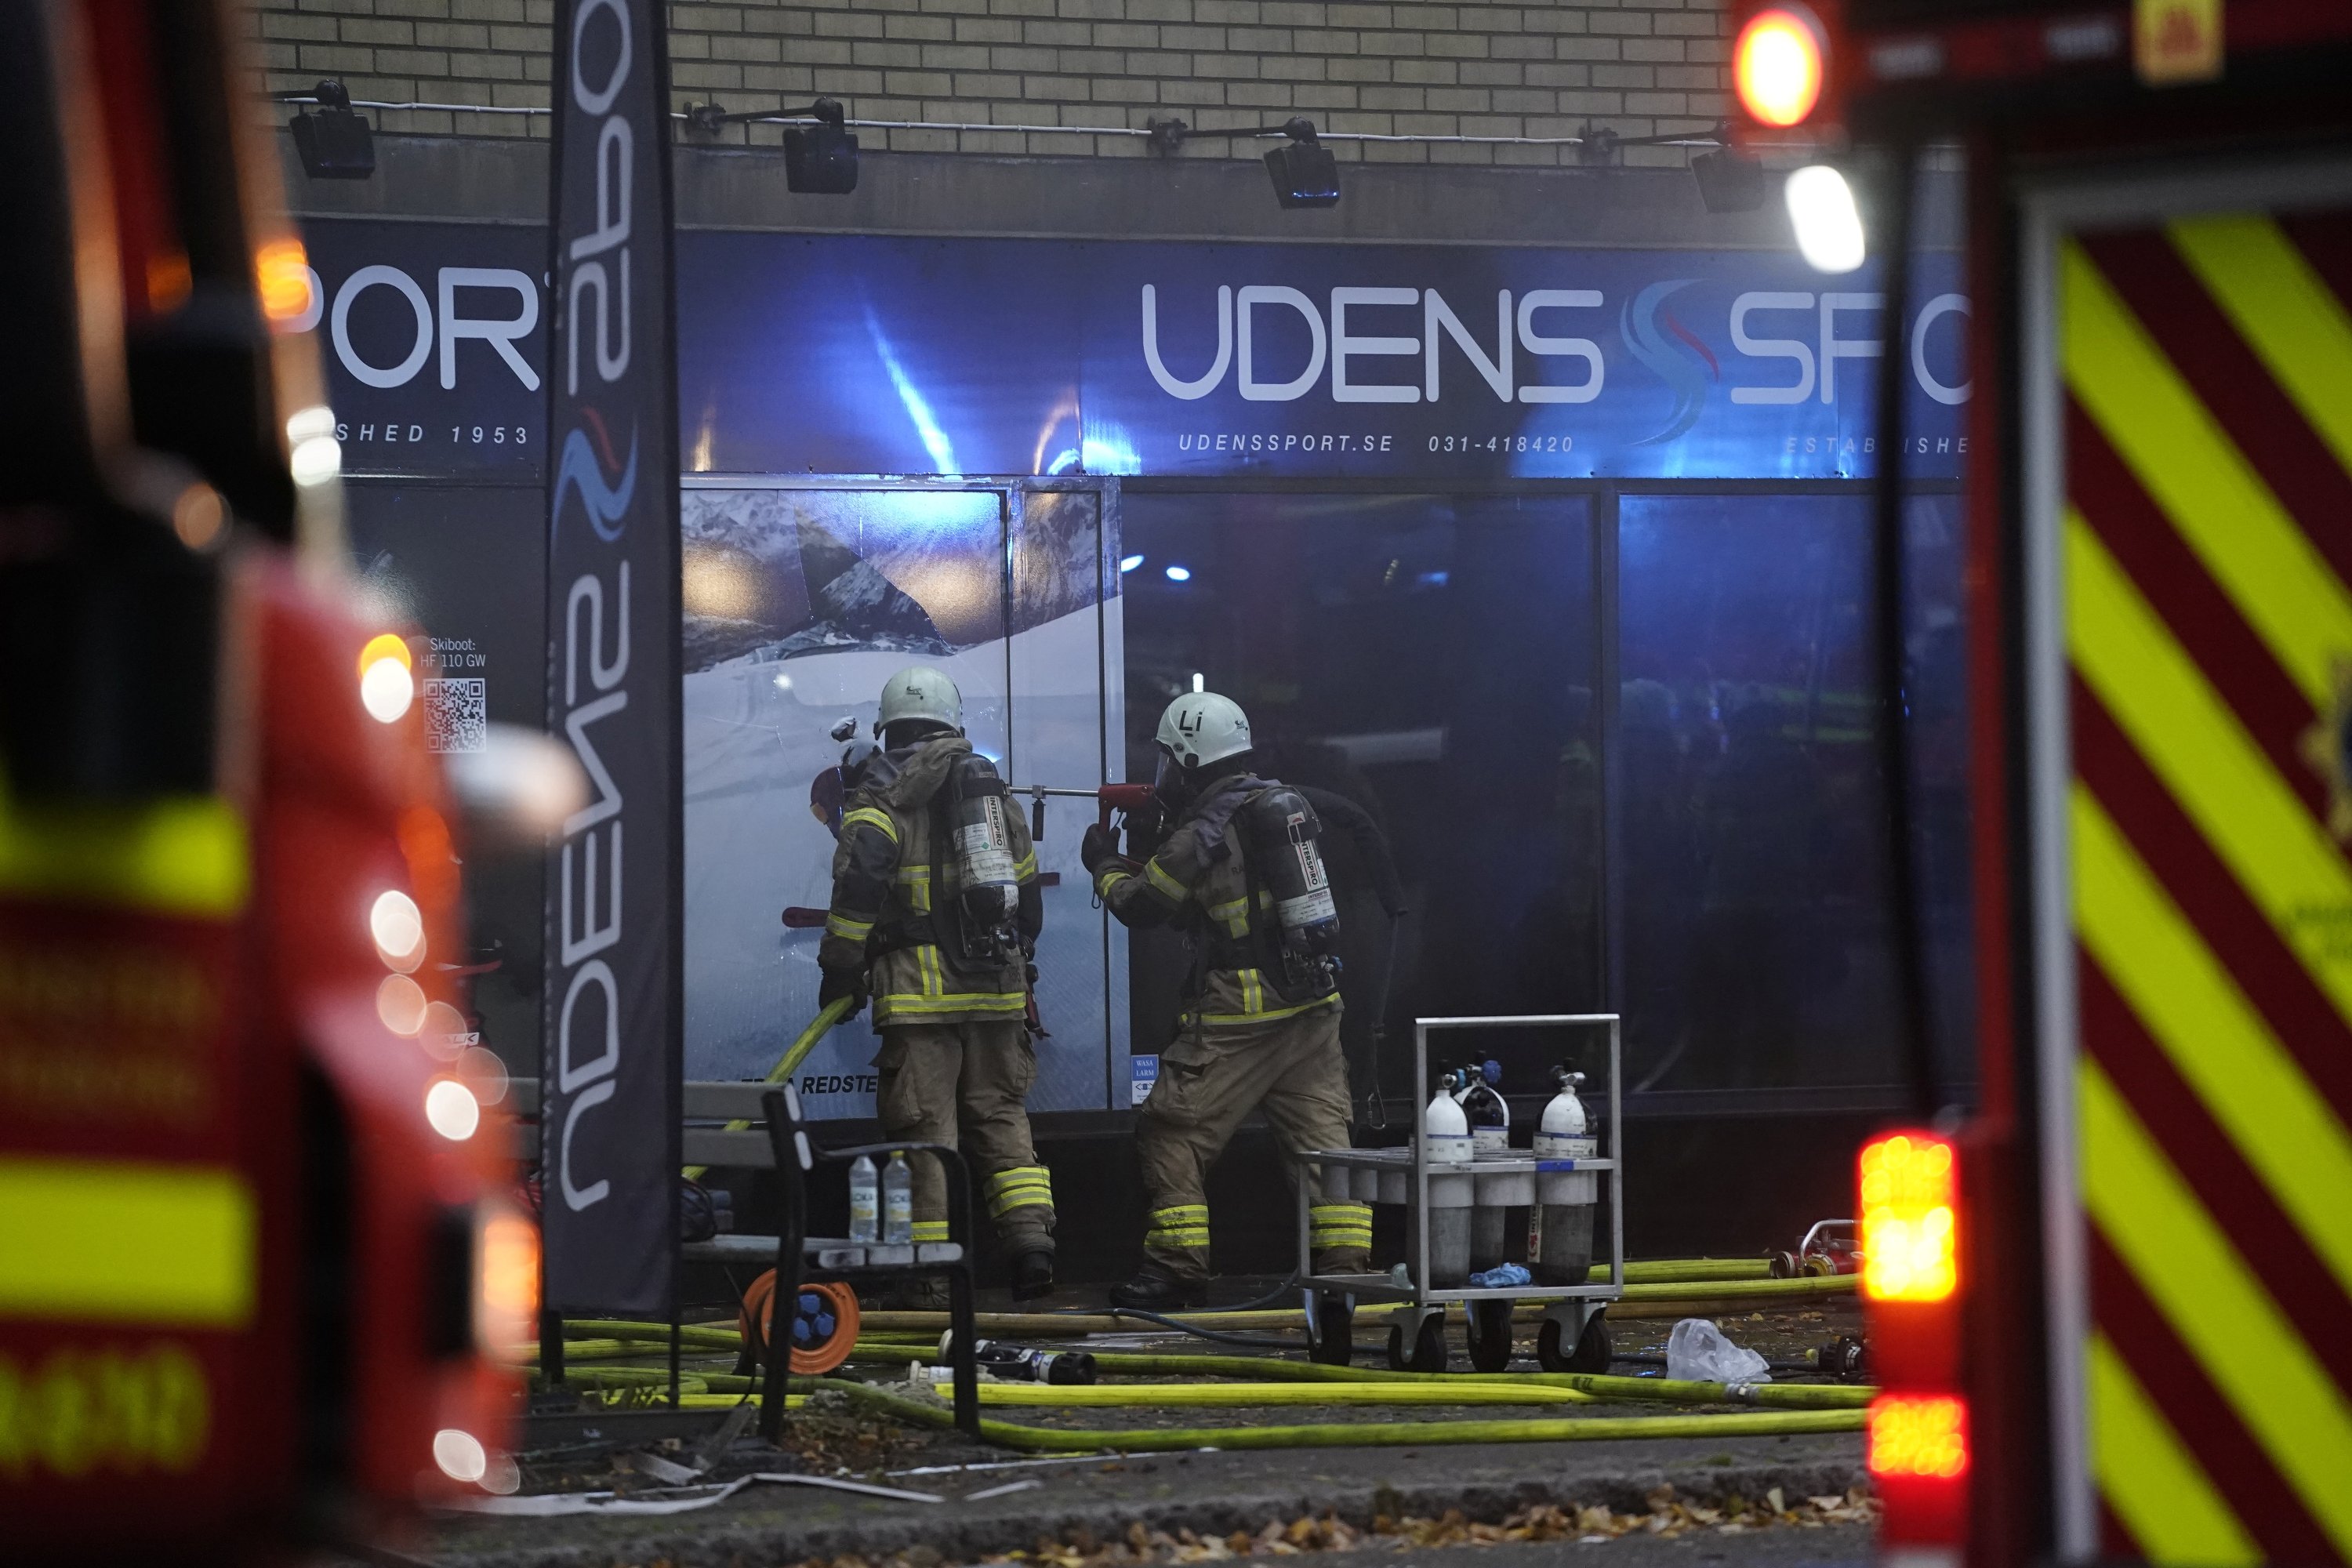 An emergency services crew works to evacuate people and put out a fire after an explosion hit an apartment building in Annedal, central Gothenburg, Sweden, Sept. 28, 2021. (Reuters Photo)